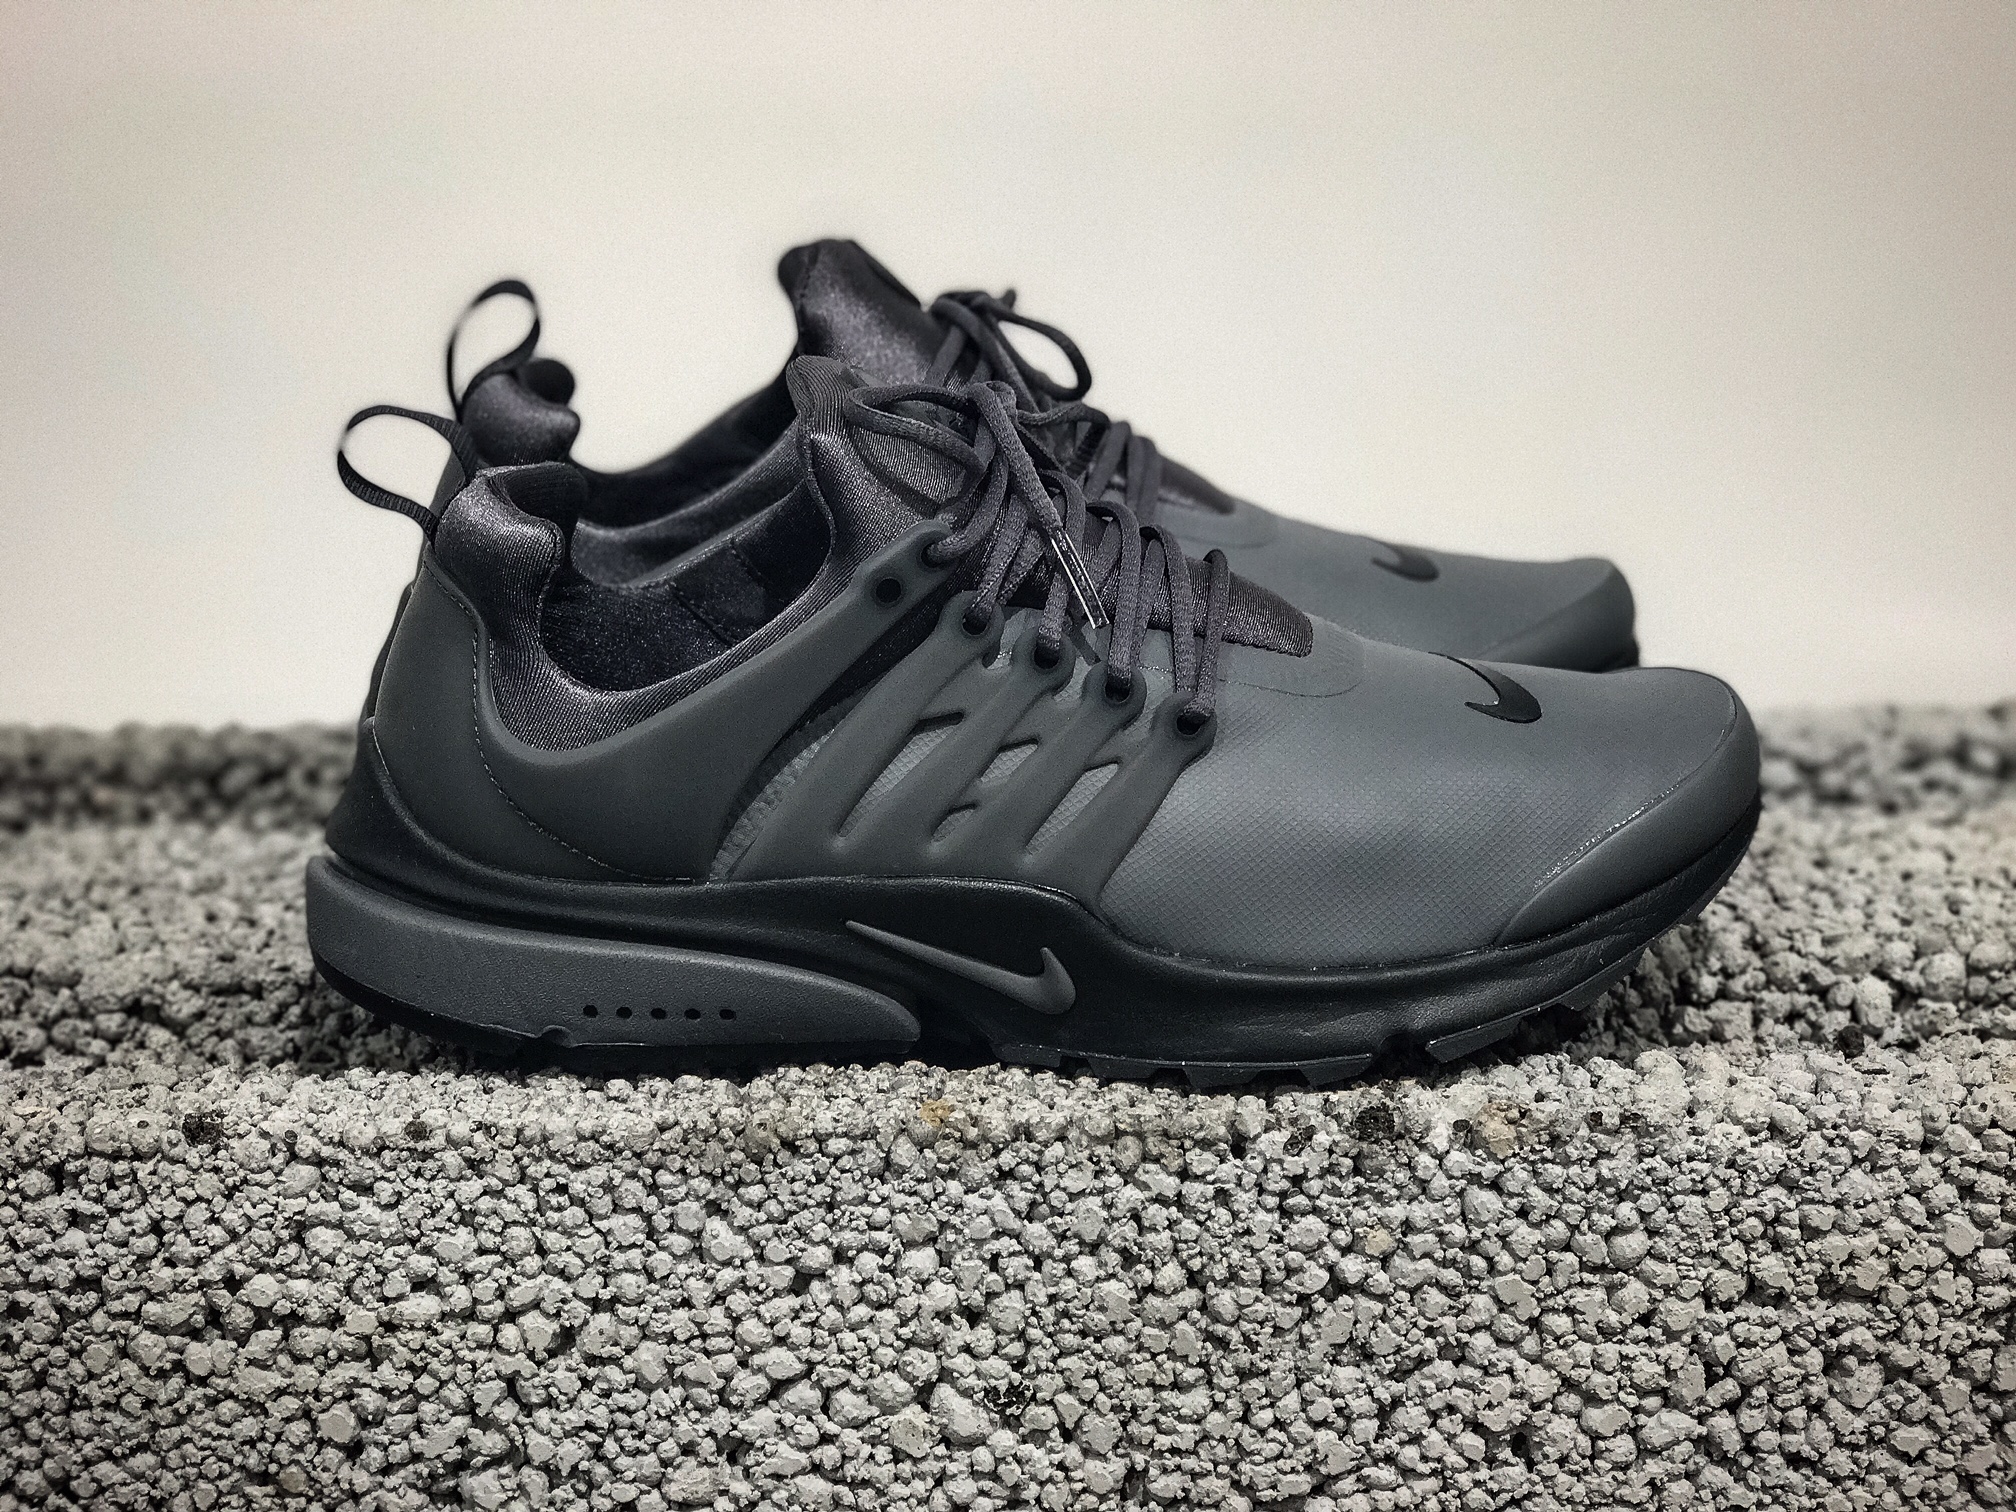 The Nike Air Presto Low Utility Comes In Dark Grey And Anthracite